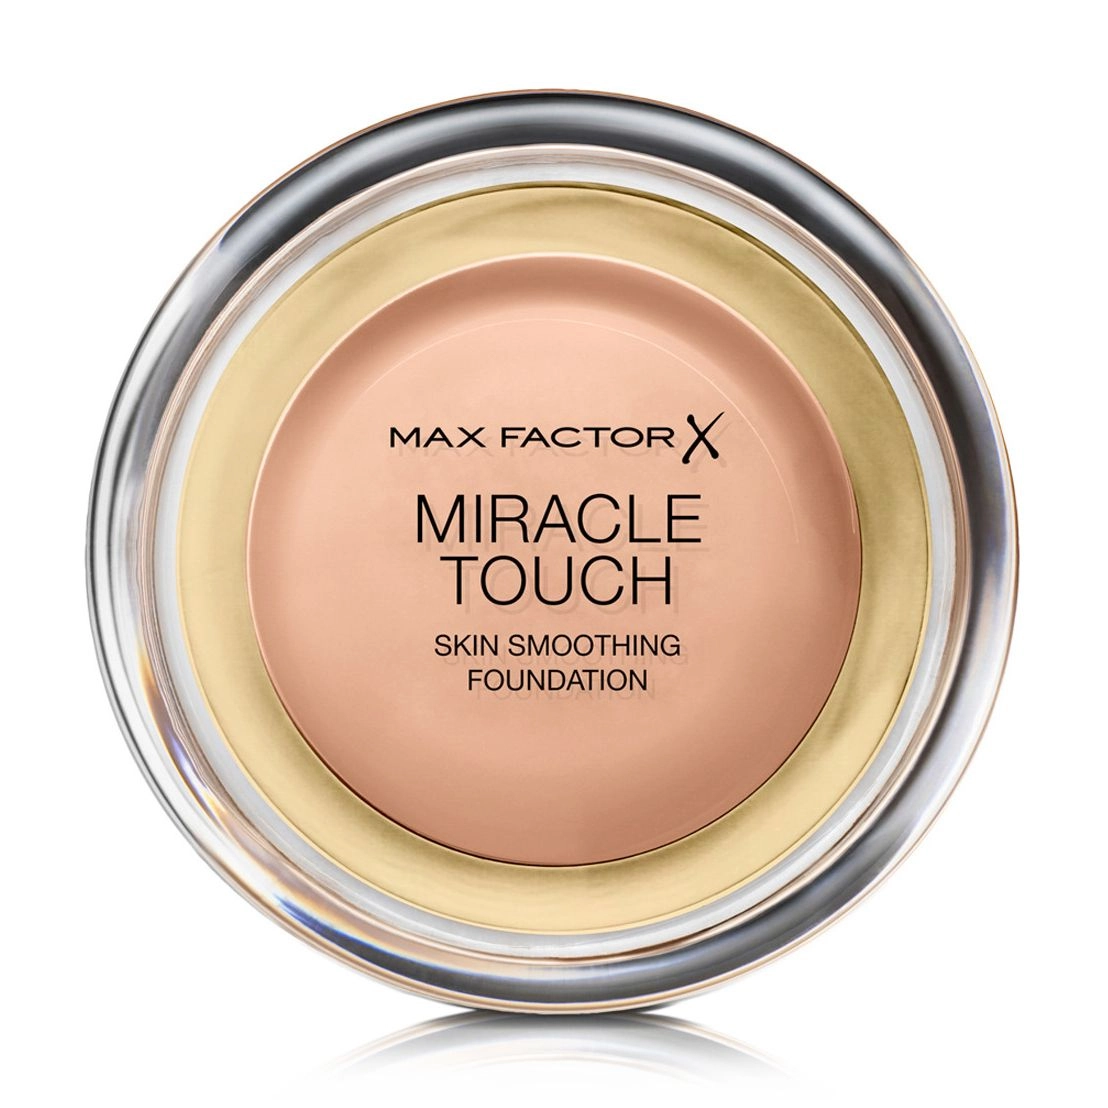 Max Factor Тональна основа для лица Miracle Touch Foundation, 11.5 г - фото N1